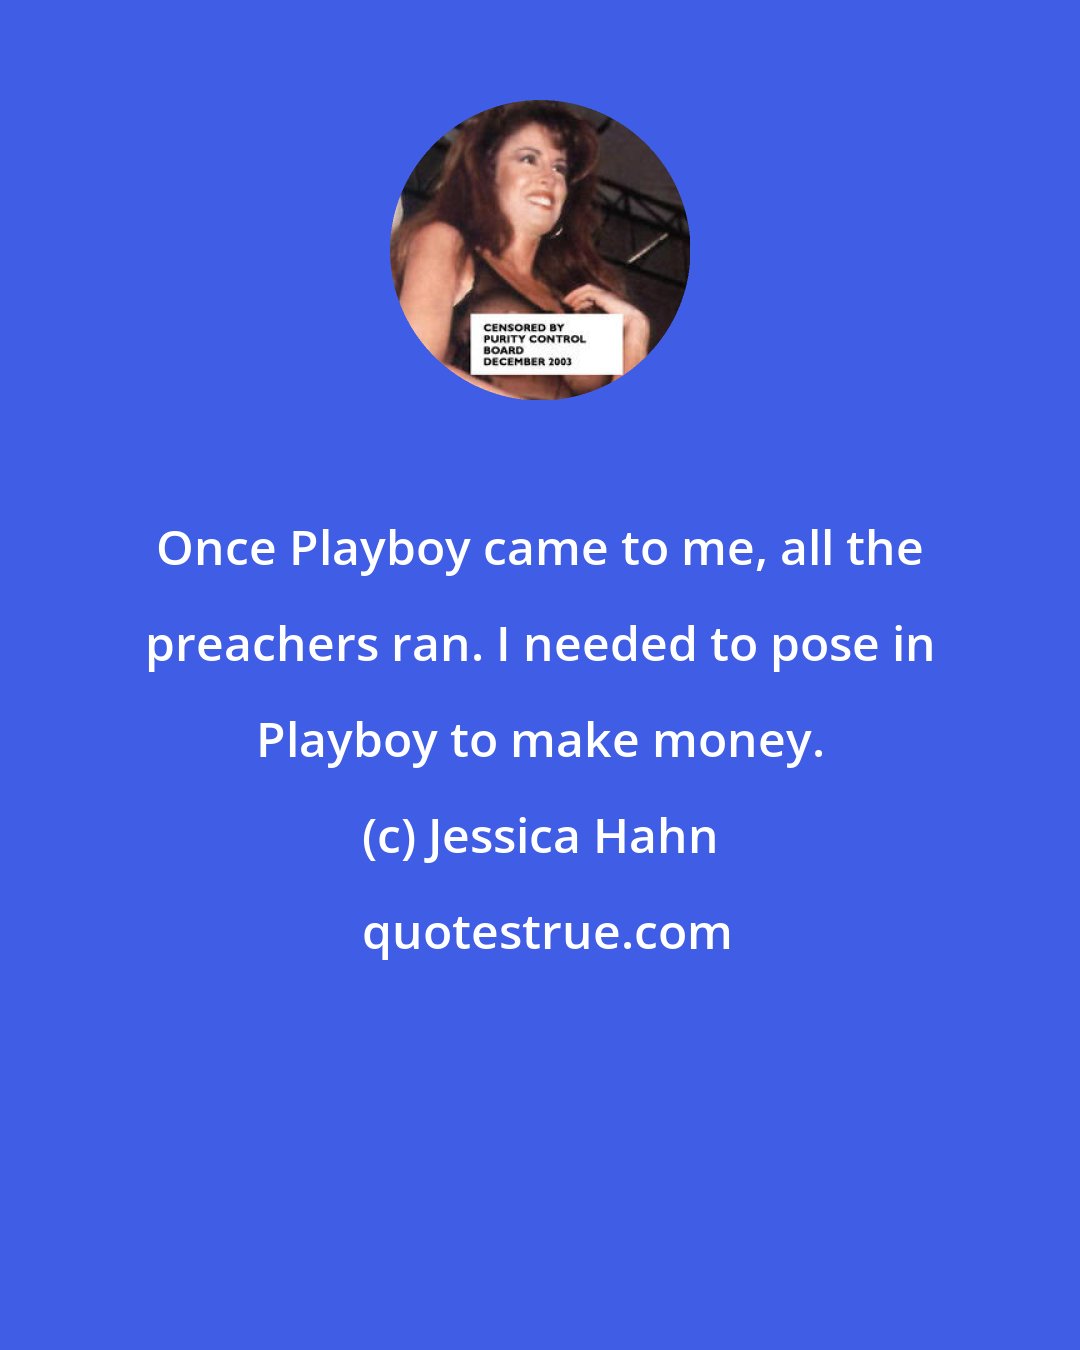 Jessica Hahn: Once Playboy came to me, all the preachers ran. I needed to pose in Playboy to make money.